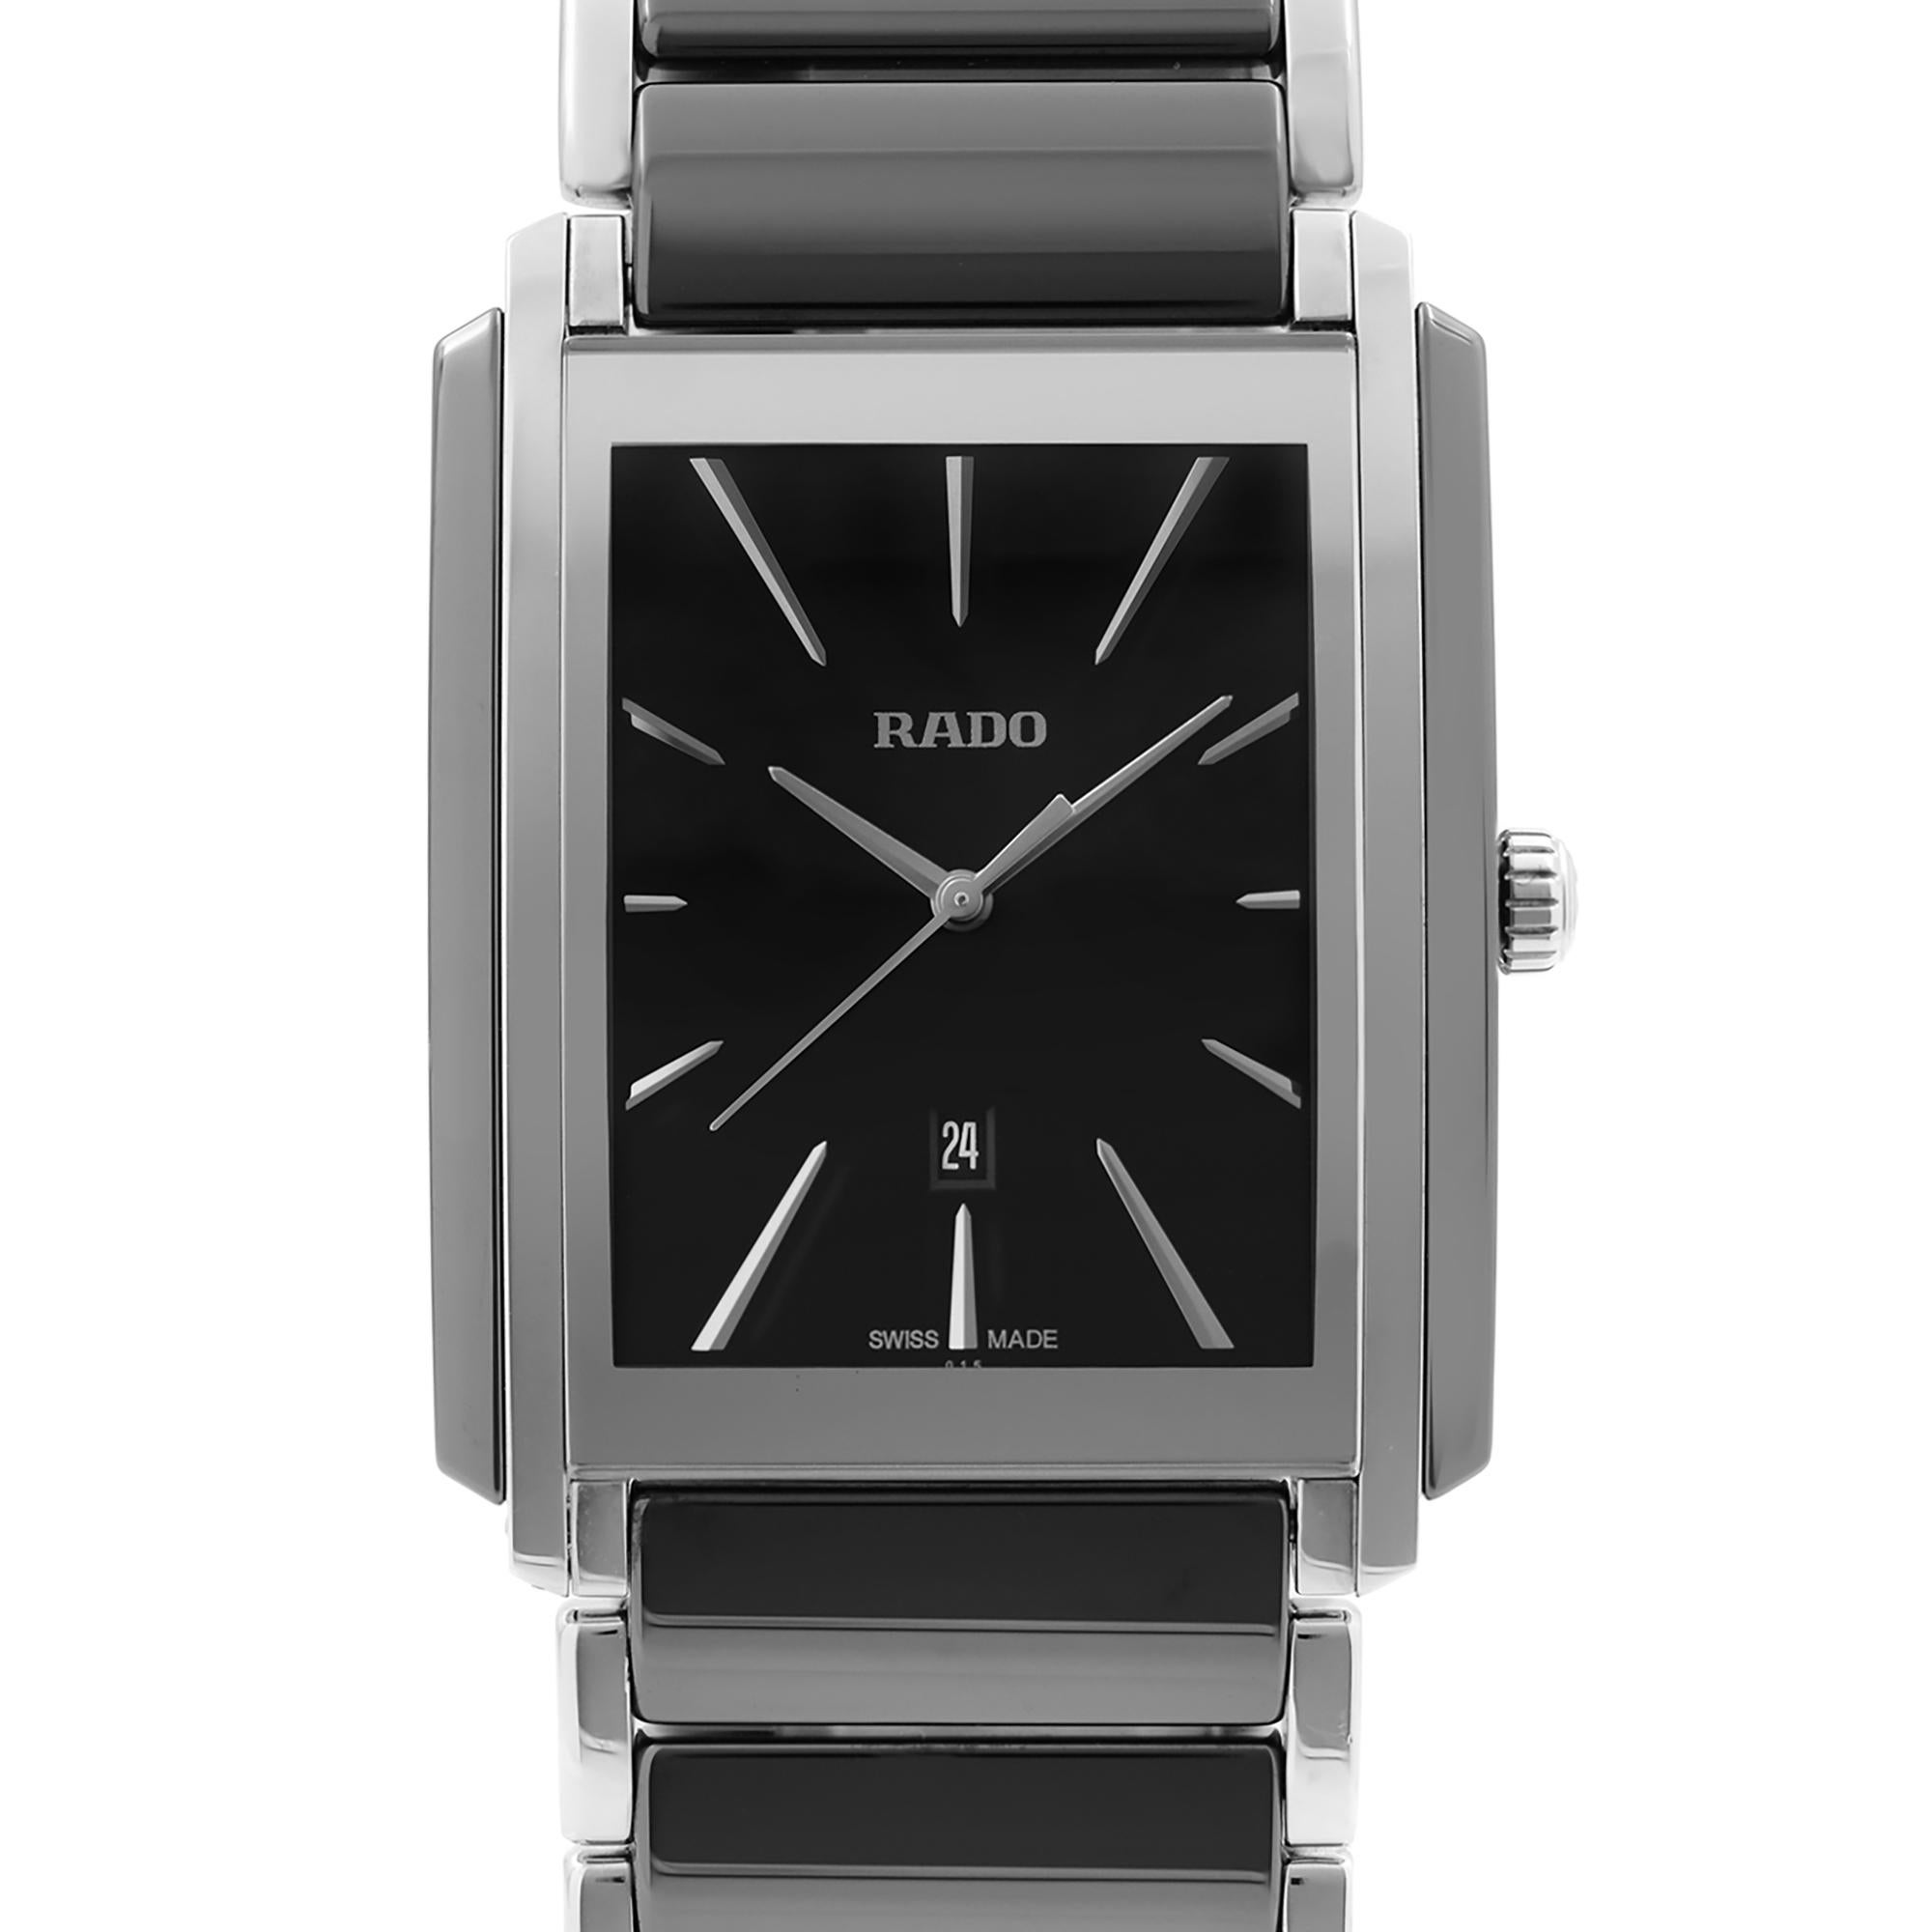 Display Model Rado Integral Stainless Steel Ceramic Black Dial Quartz Men's Watch R20963152. The Watch Might have Minor Blemishes Due to Store Handling. This Timepiece Features: Ceramic and Stainless Steel Case and Bracelet. Black Dial with